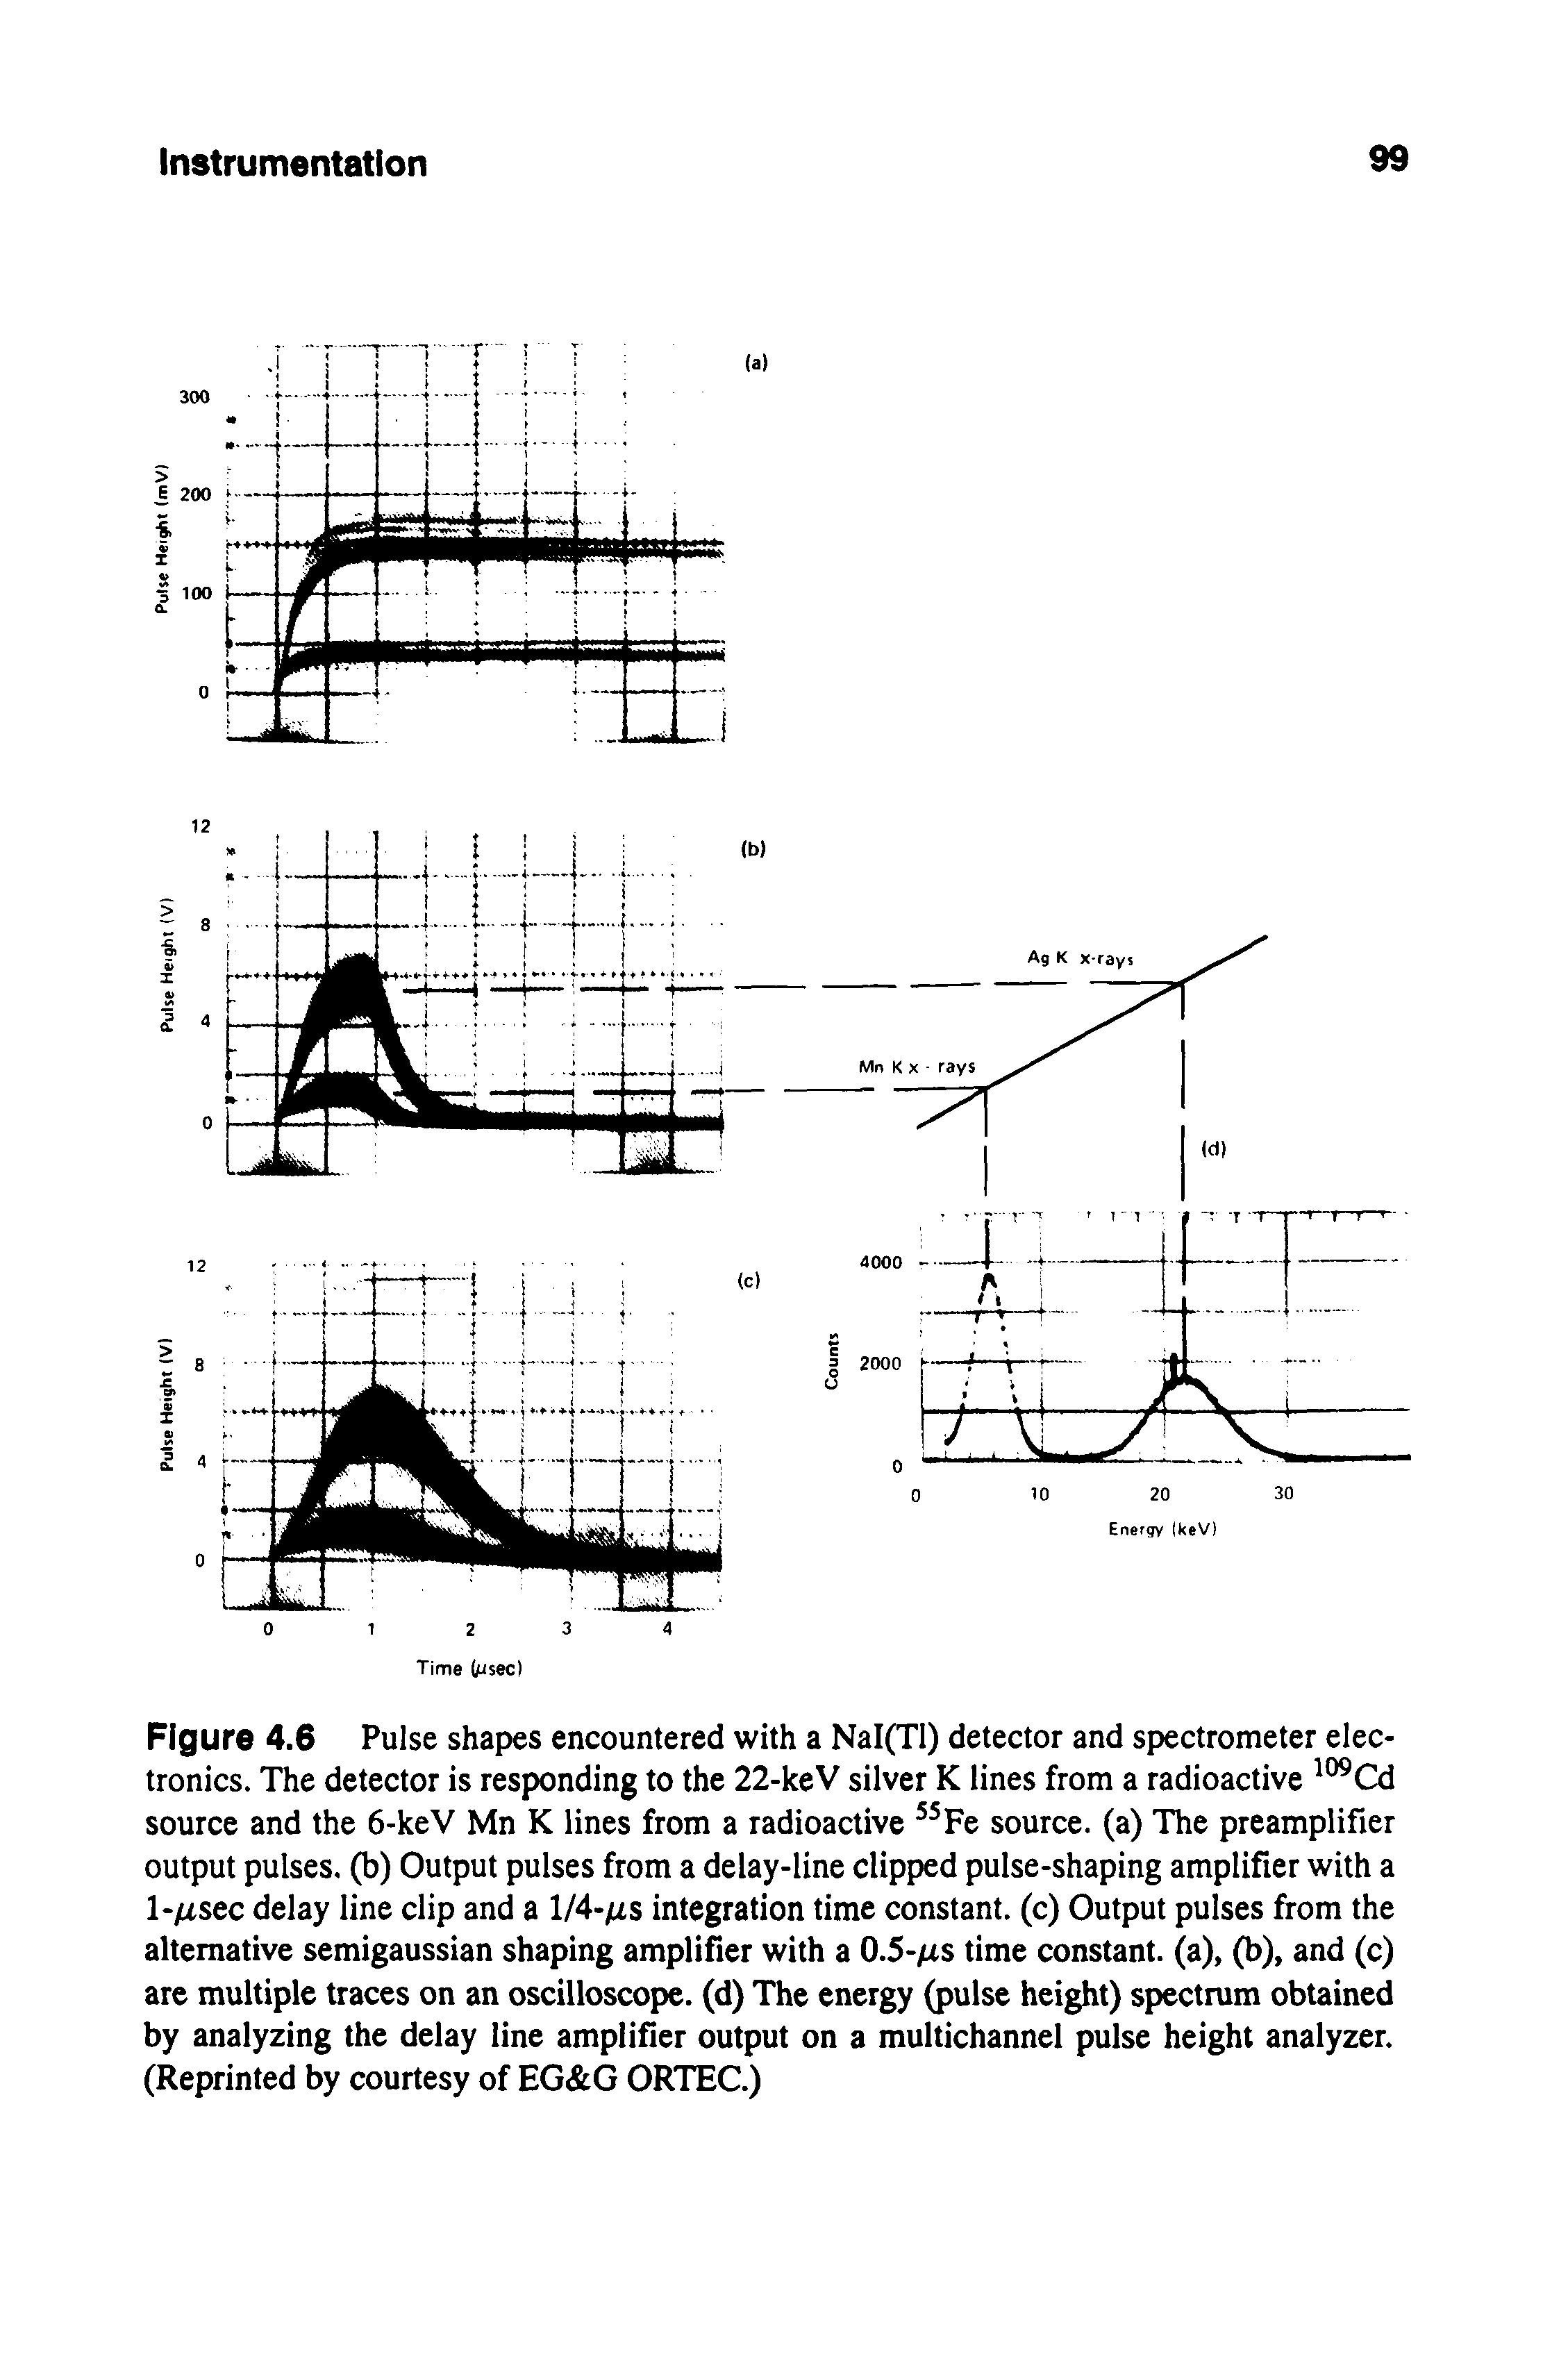 Figure 4.6 Pulse shapes encountered with a NaI(Tl) detector and spectrometer electronics. The detector is responding to the 22-keV silver K lines from a radioactive ° Cd source and the 6-keV Mn K lines from a radioactive Fe source, (a) The preamplifier output pulses, (b) Output pulses from a delay-line clipped pulse-shaping amplifier with a 1-/Ltsec delay line clip and a l/4-)US integration time constant, (c) Output pulses from the alternative semigaussian shaping amplifier with a 0.5-fxs time constant, (a), (b), and (c) are multiple traces on an oscilloscope, (d) The energy (pulse height) spectrum obtained by analyzing the delay line amplifier output on a multichannel pulse height analyzer. (Reprinted by courtesy of EG G ORTEC.)...